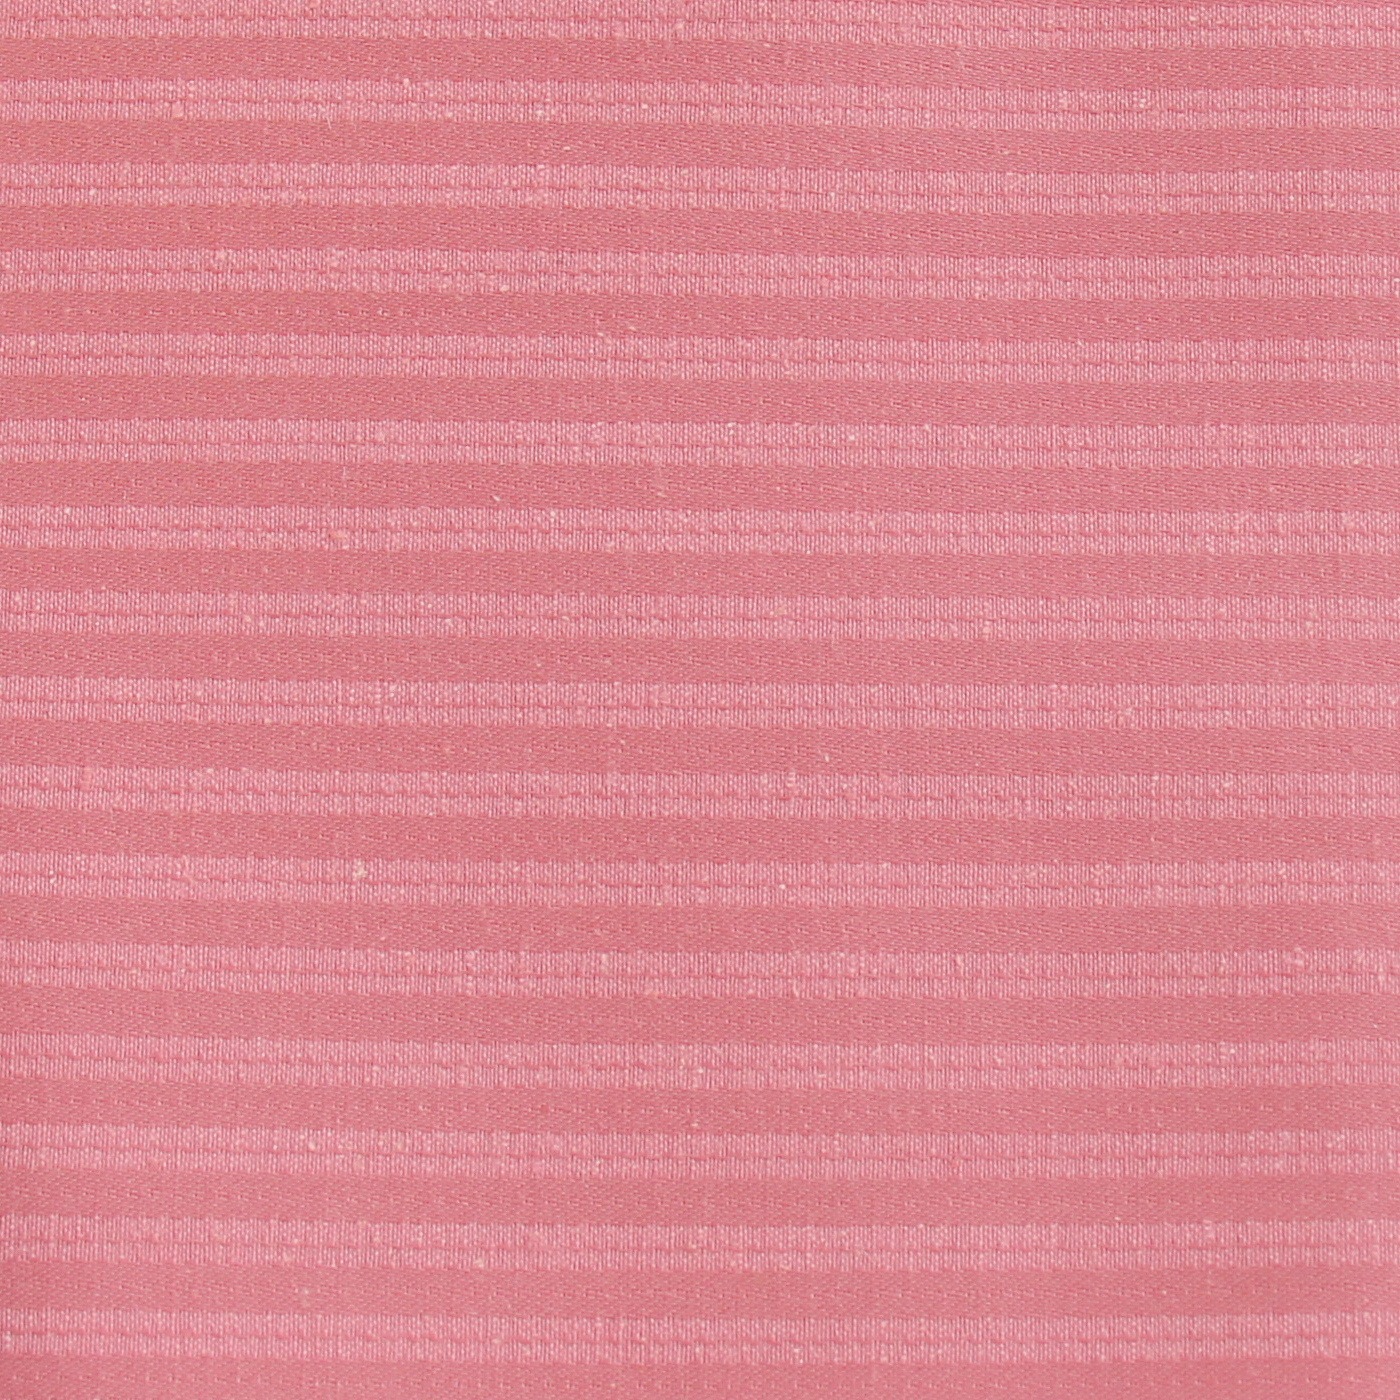 NO 10-45 DFT 115 Fabric Upholstery Sample